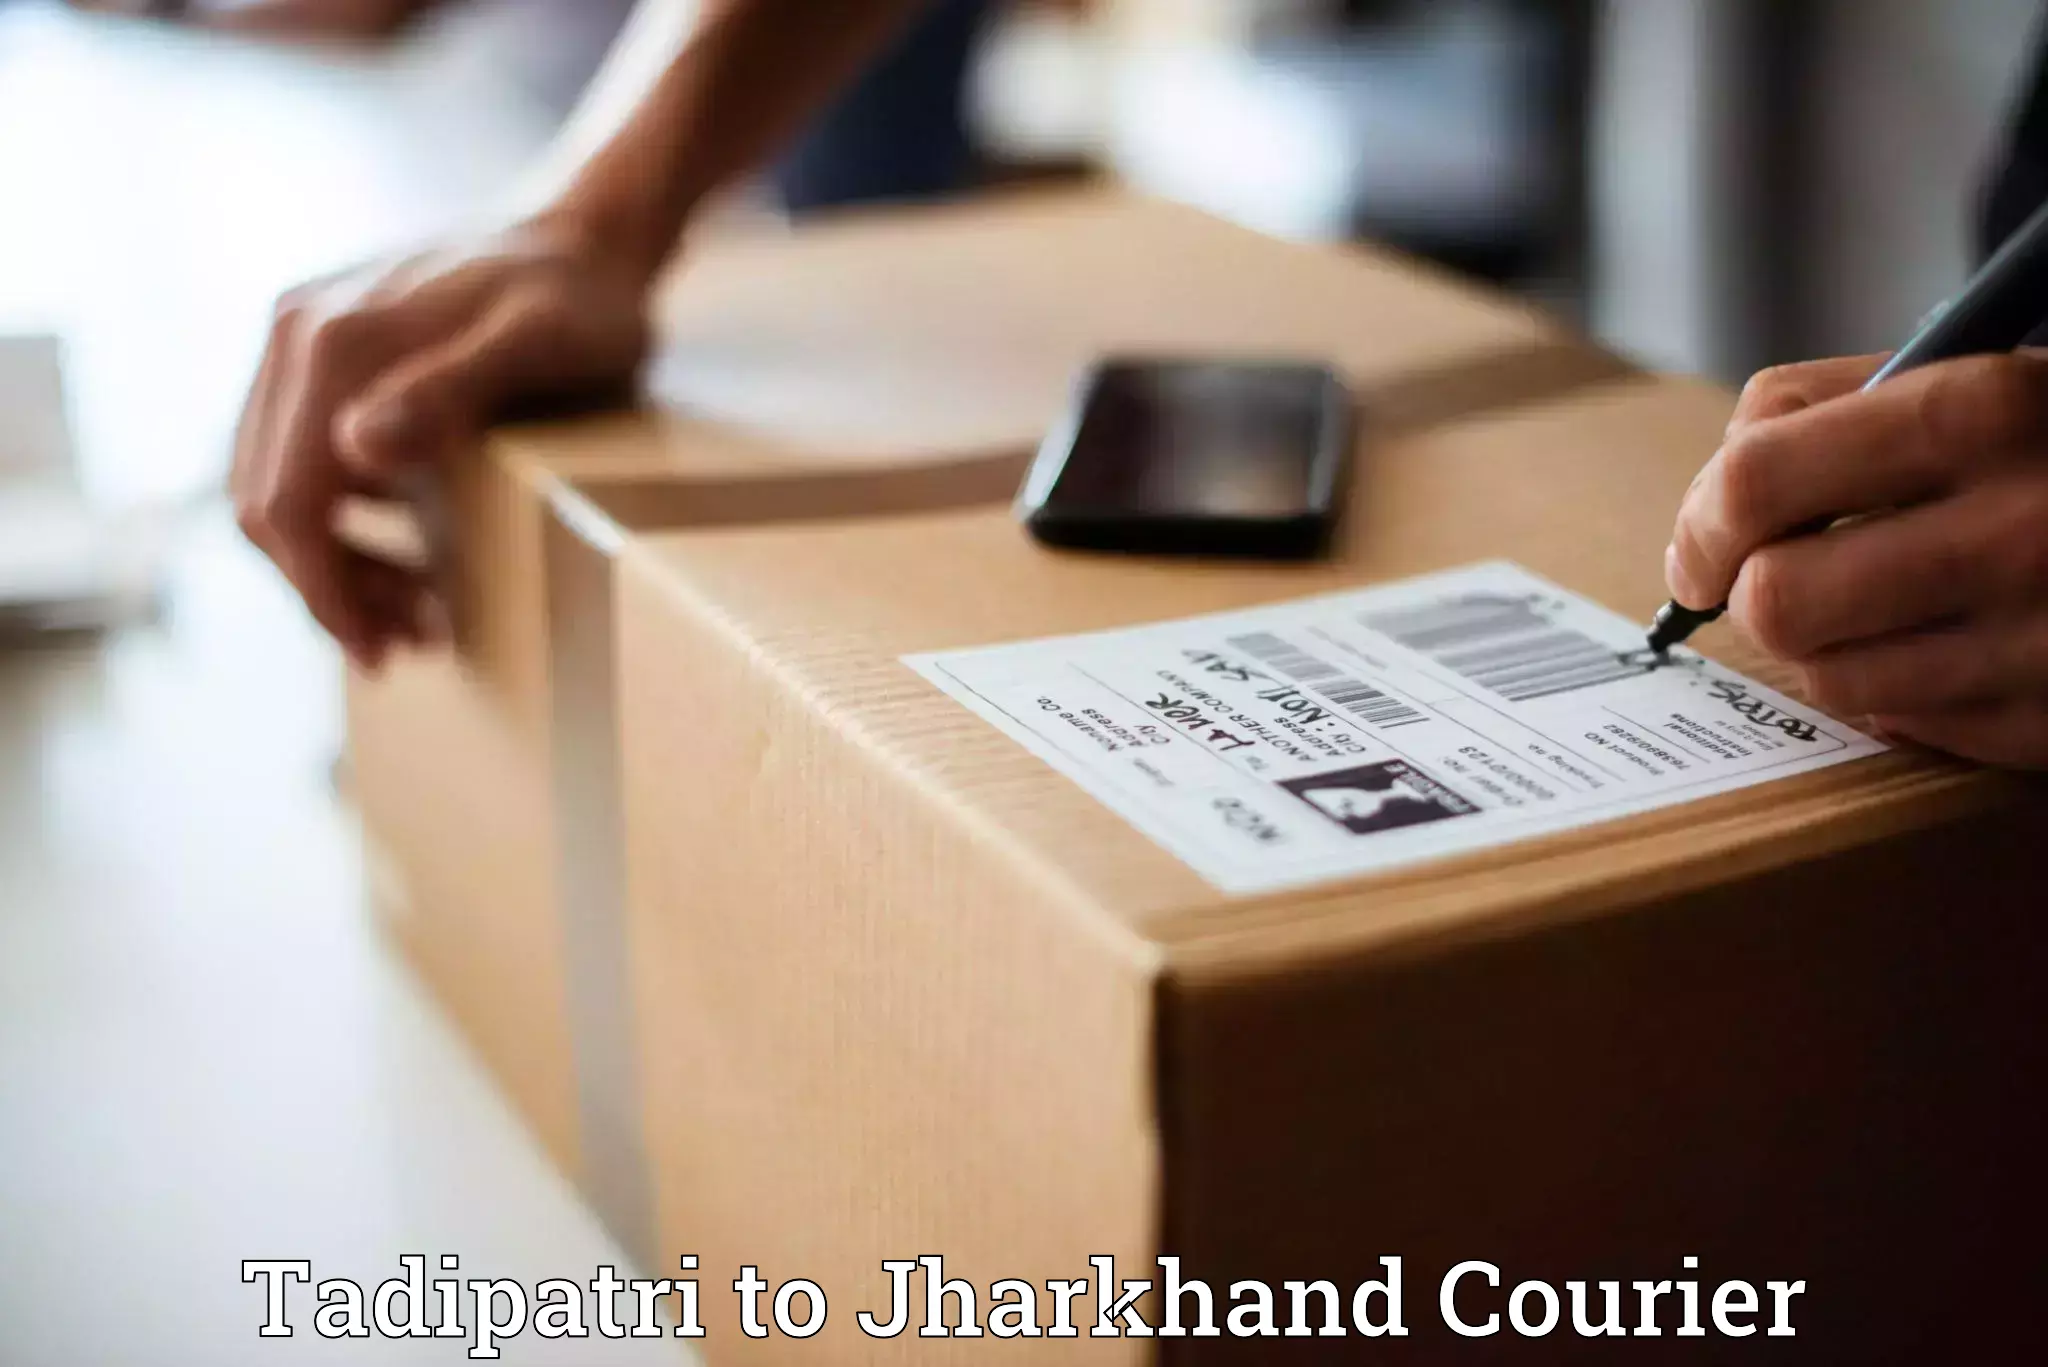 Customizable shipping options in Tadipatri to Jamshedpur